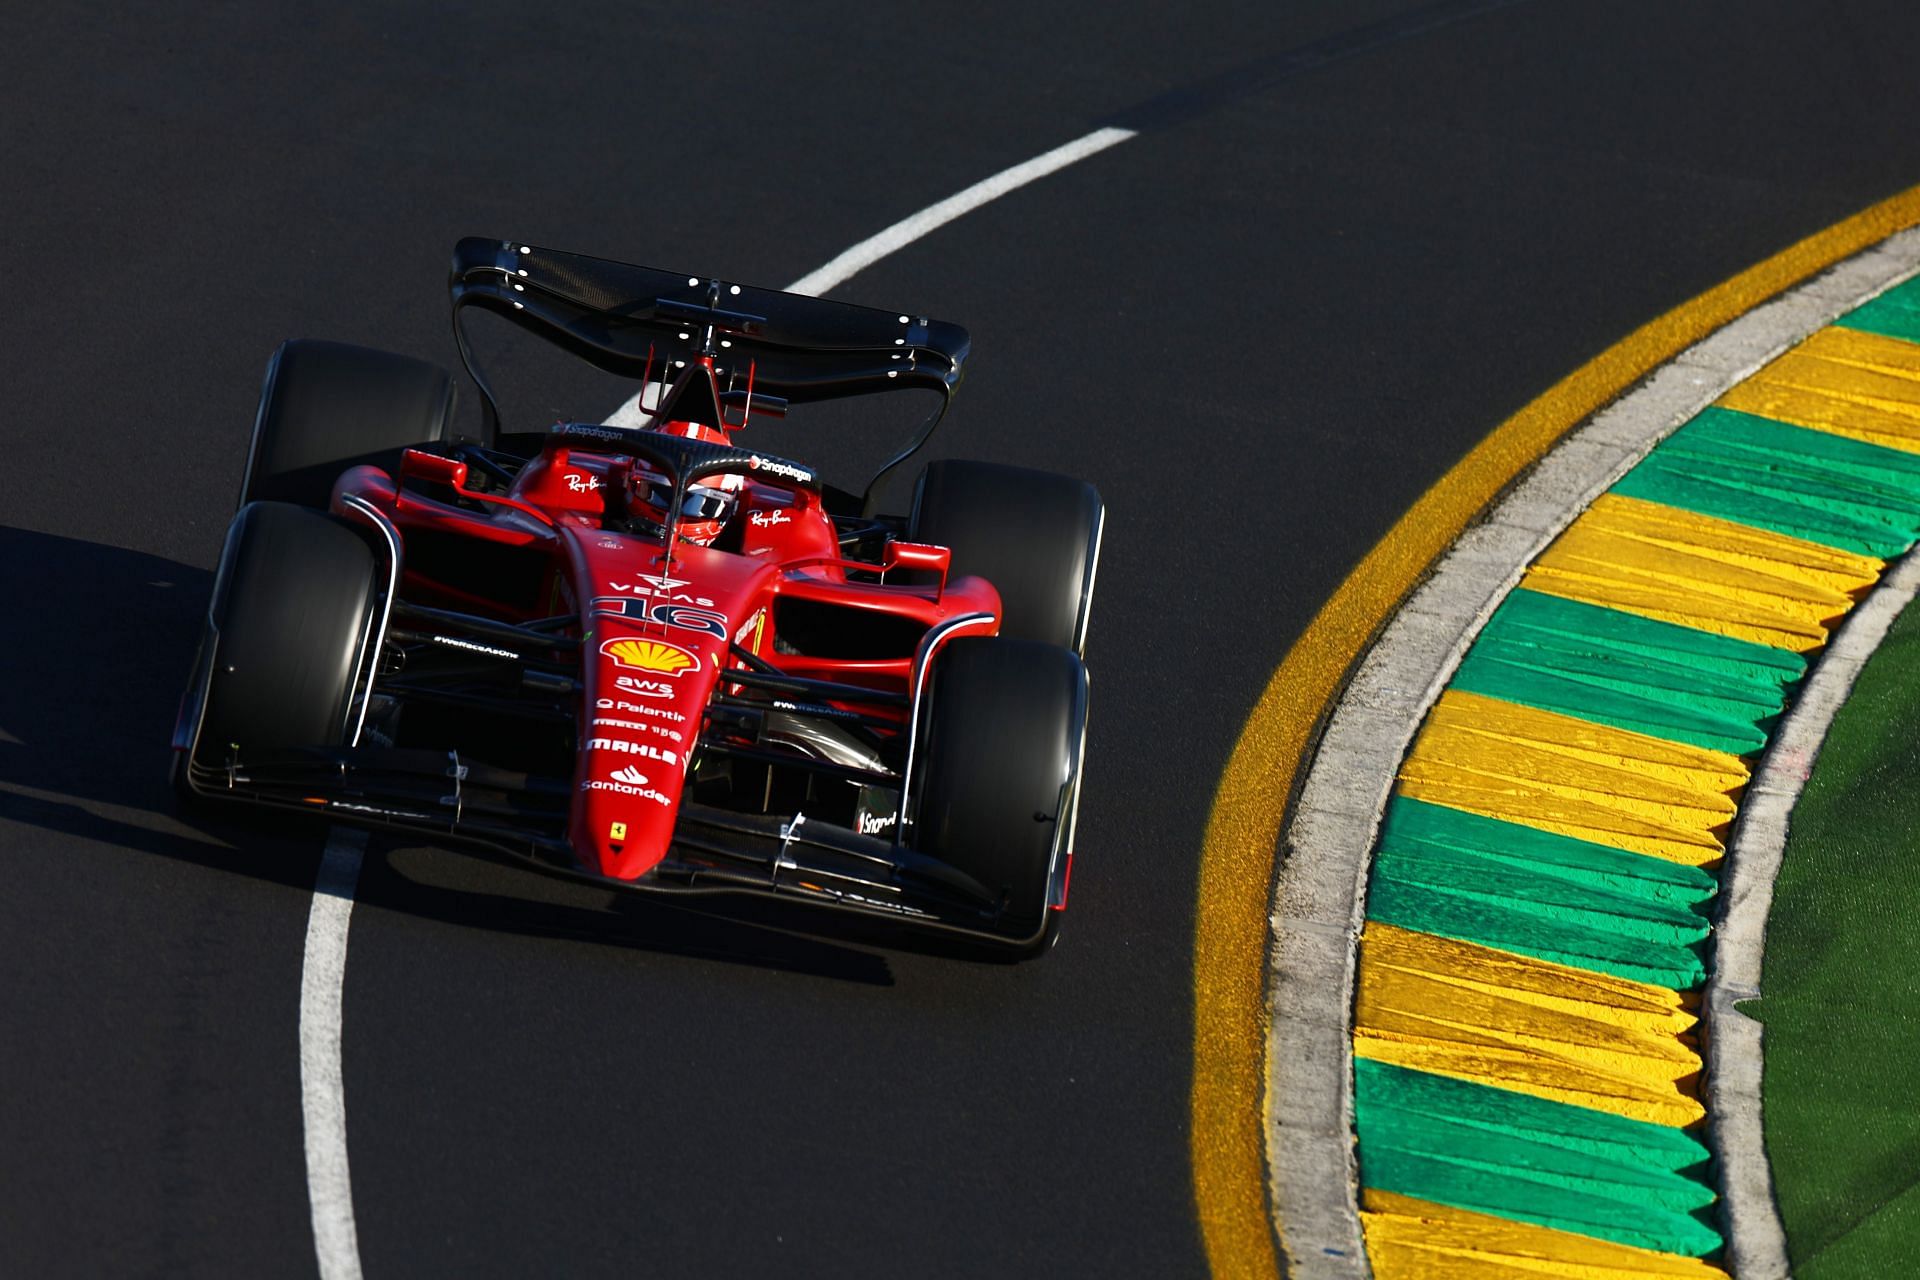 Ferrari driver Charles Leclerc en route to his win in the 2022 F1 Australian GP. (Photo by Mark Thompson/Getty Images)